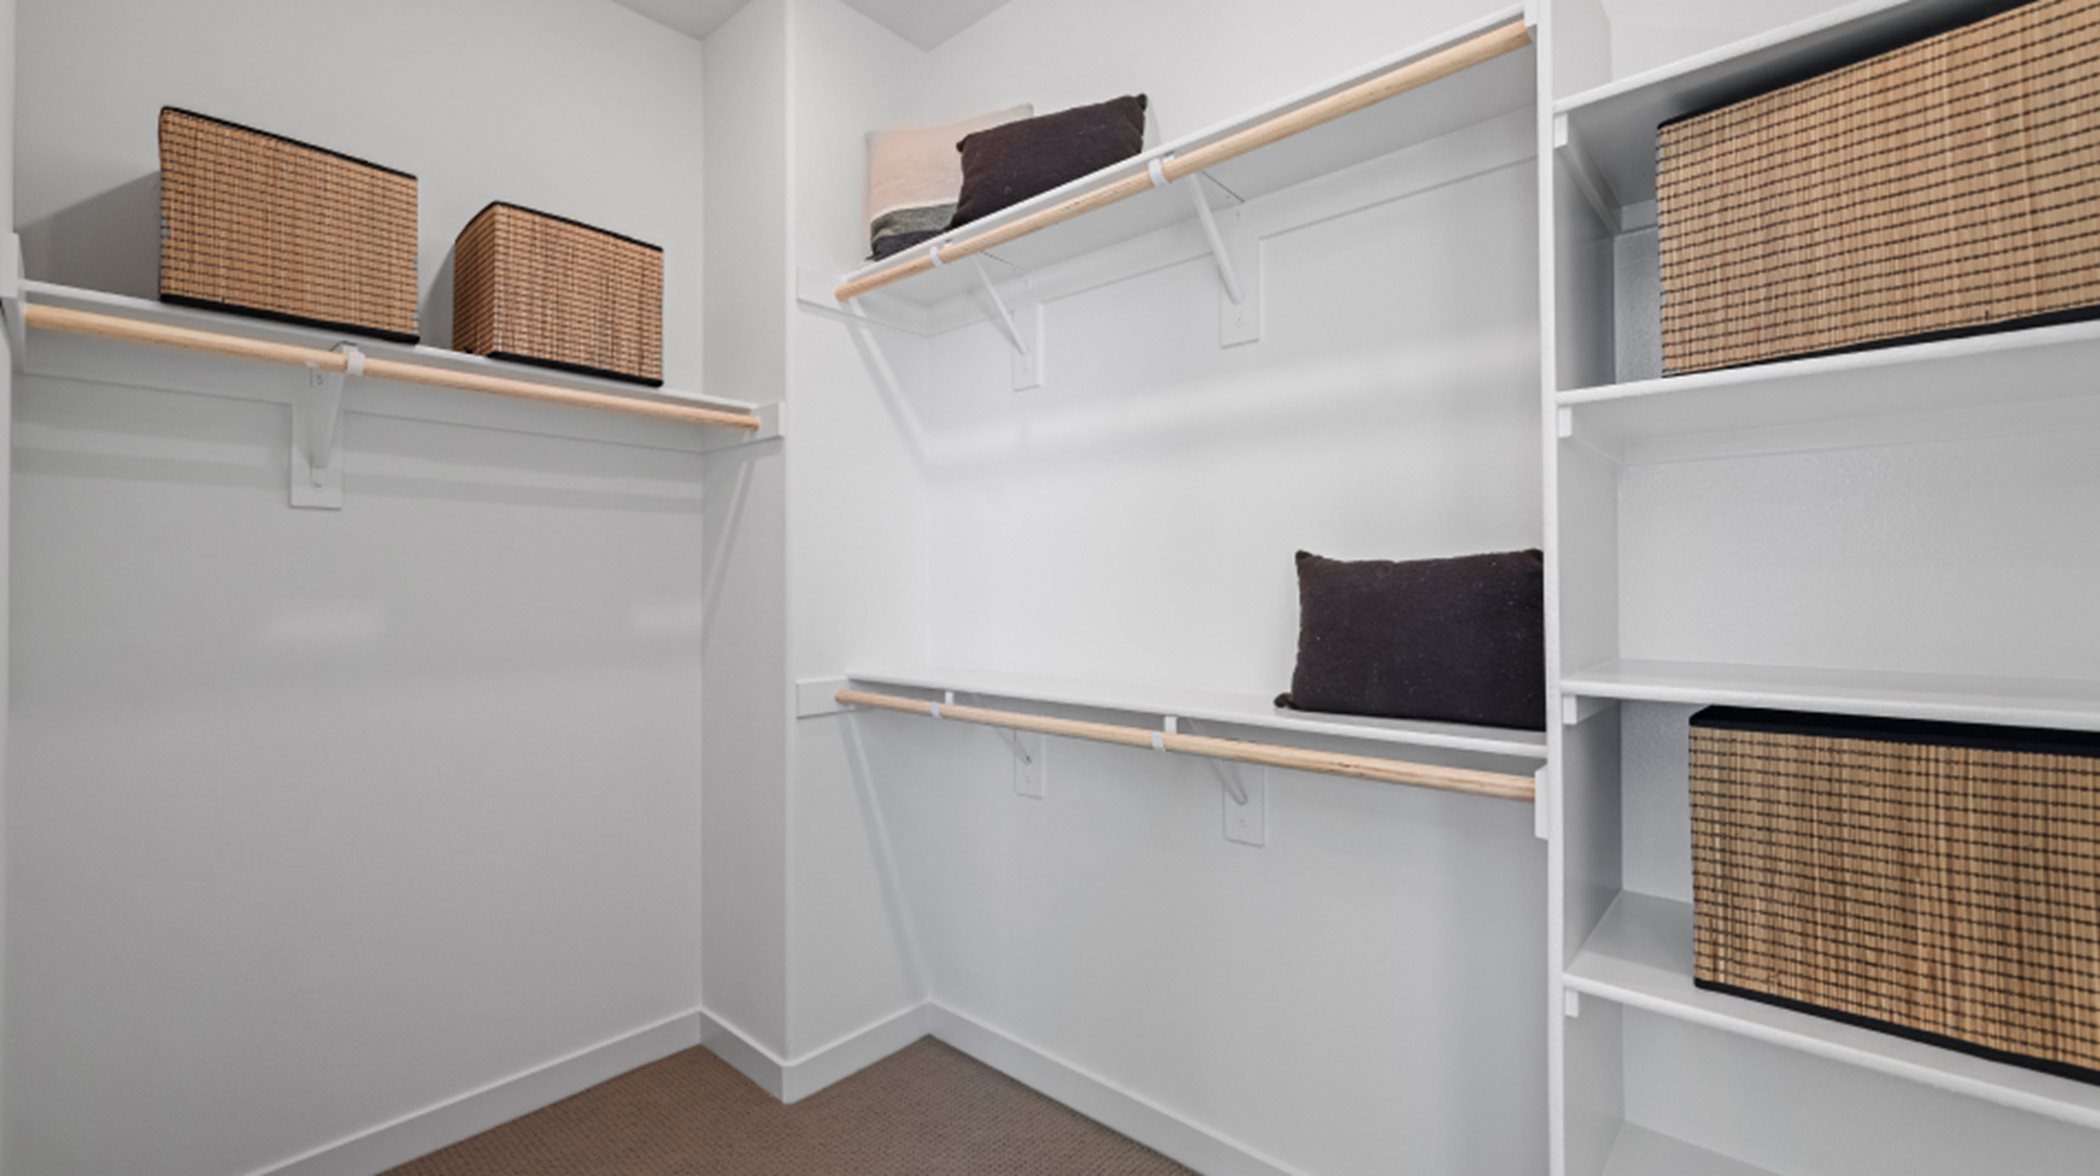 Walk in closet interior with wooden shelving